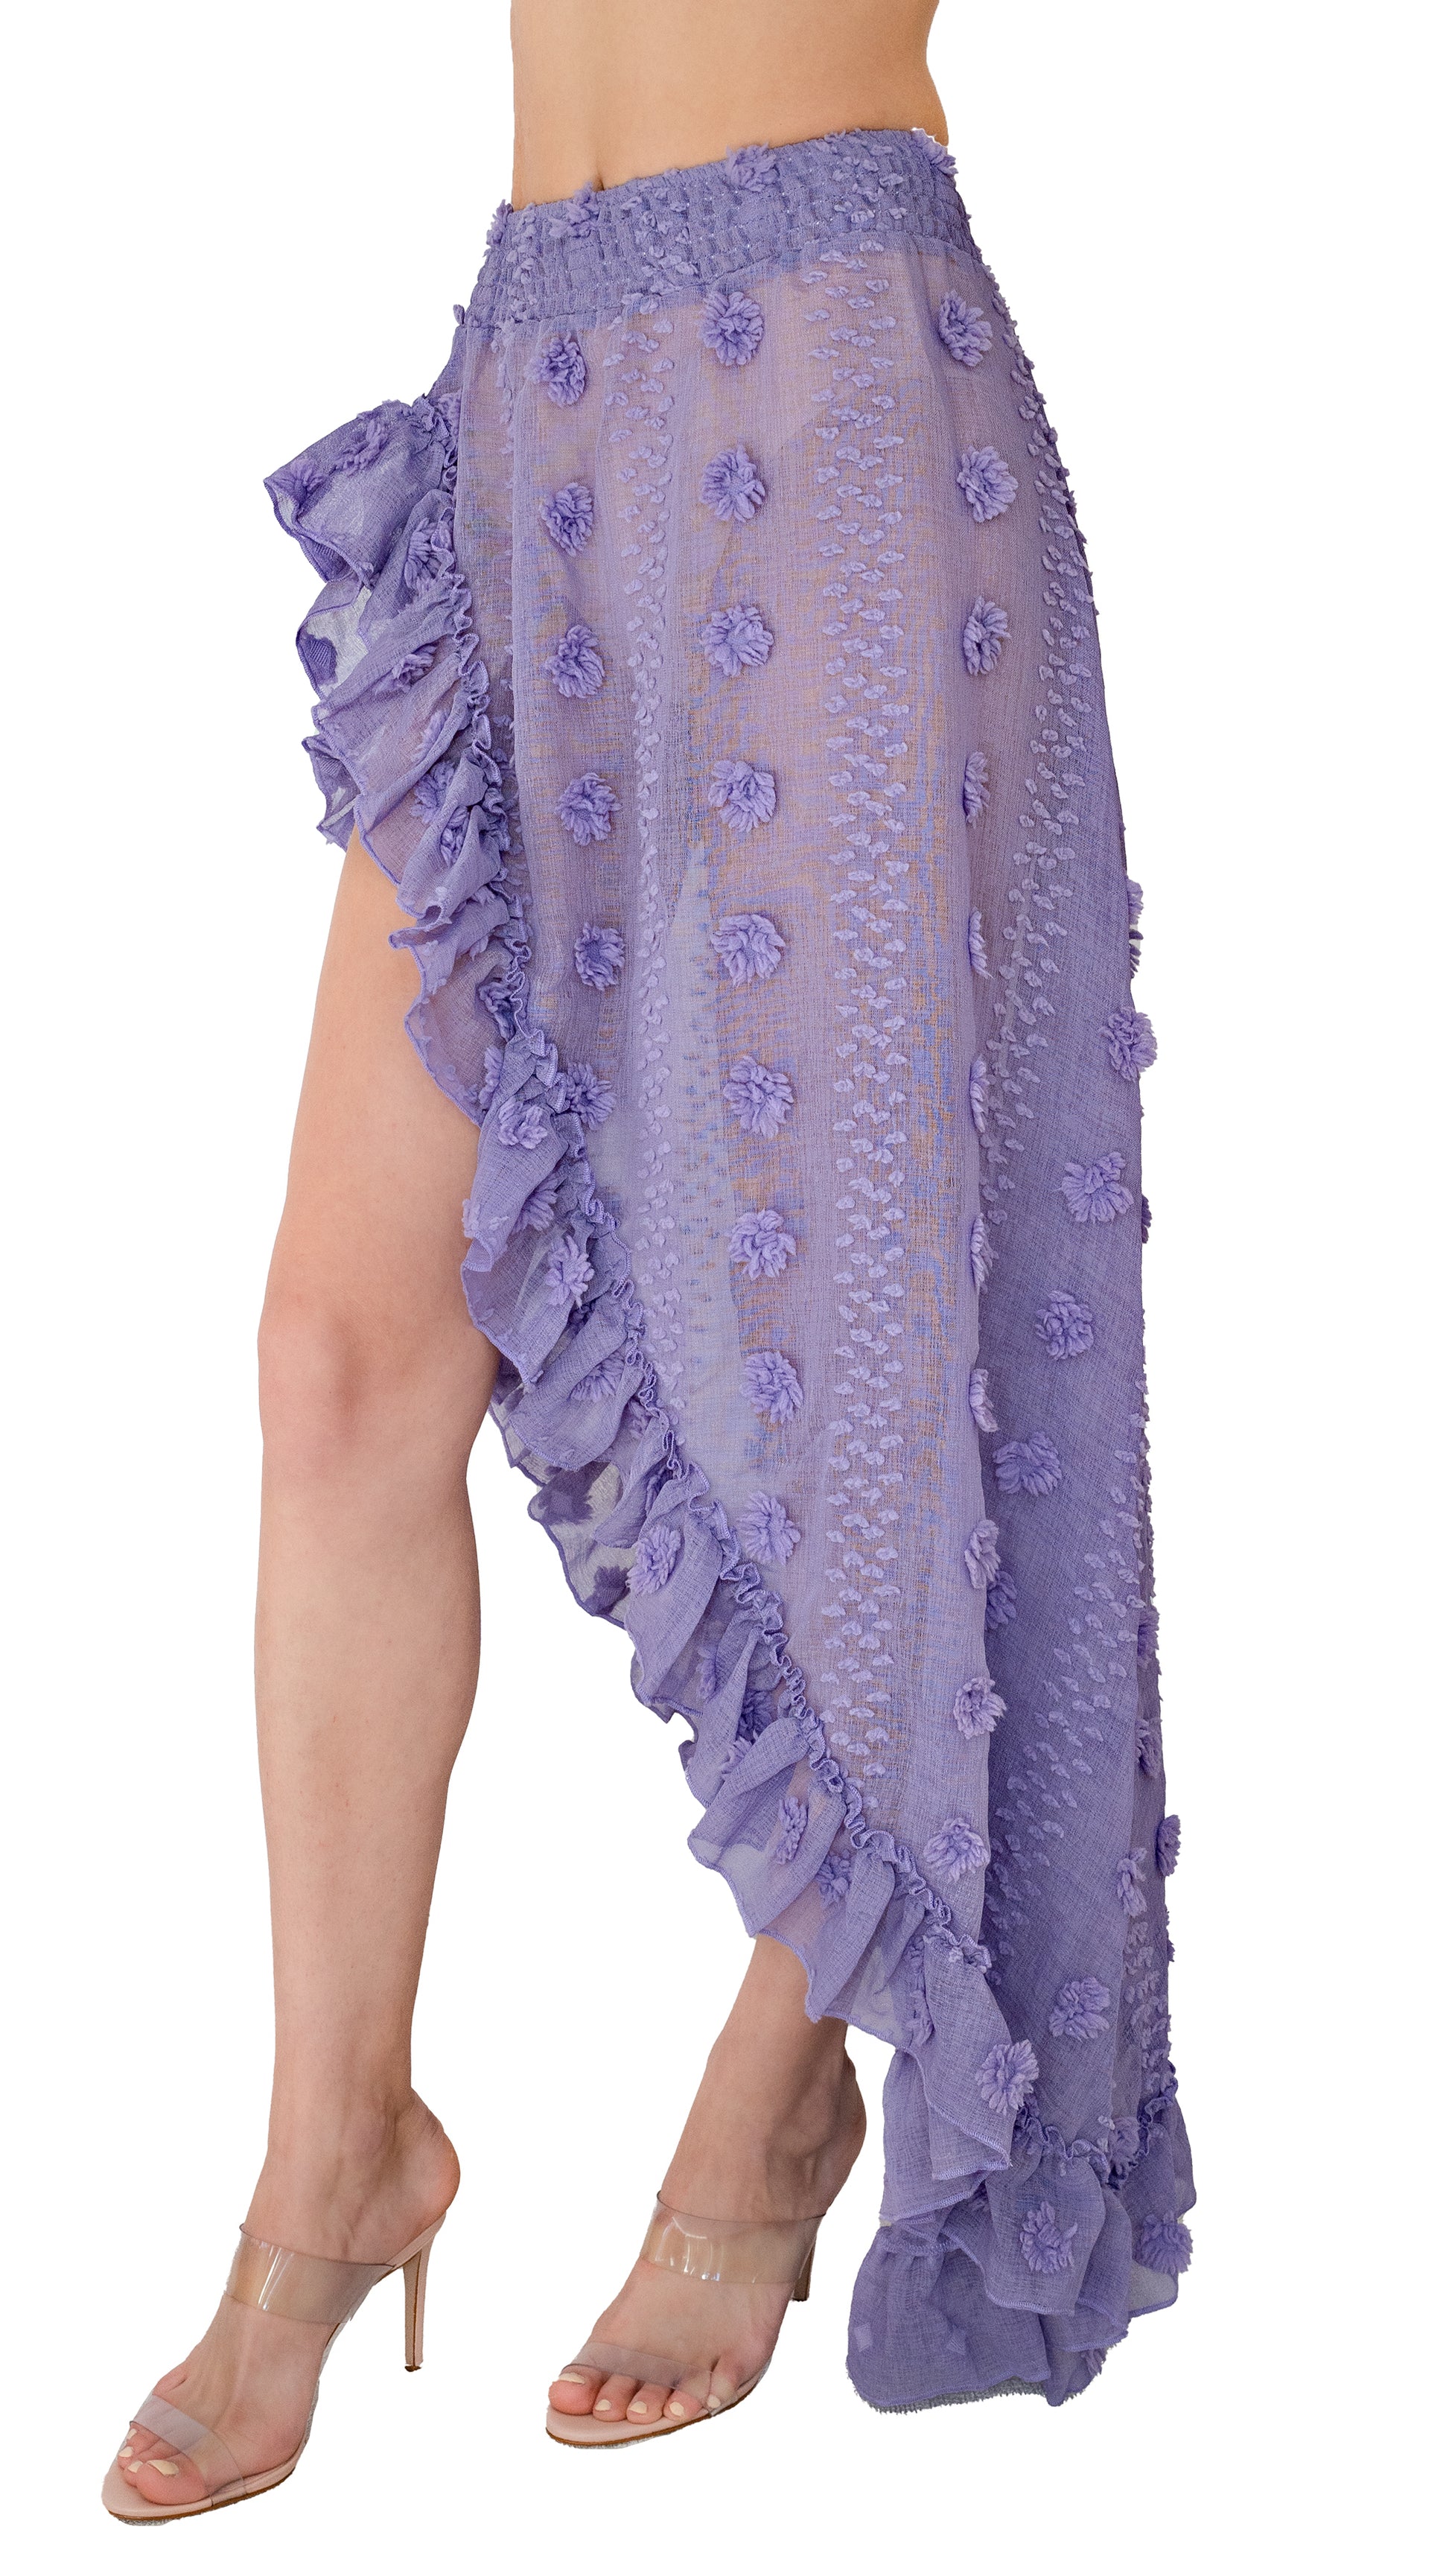 Pop St Barths Fiona Skirt in Lilac color